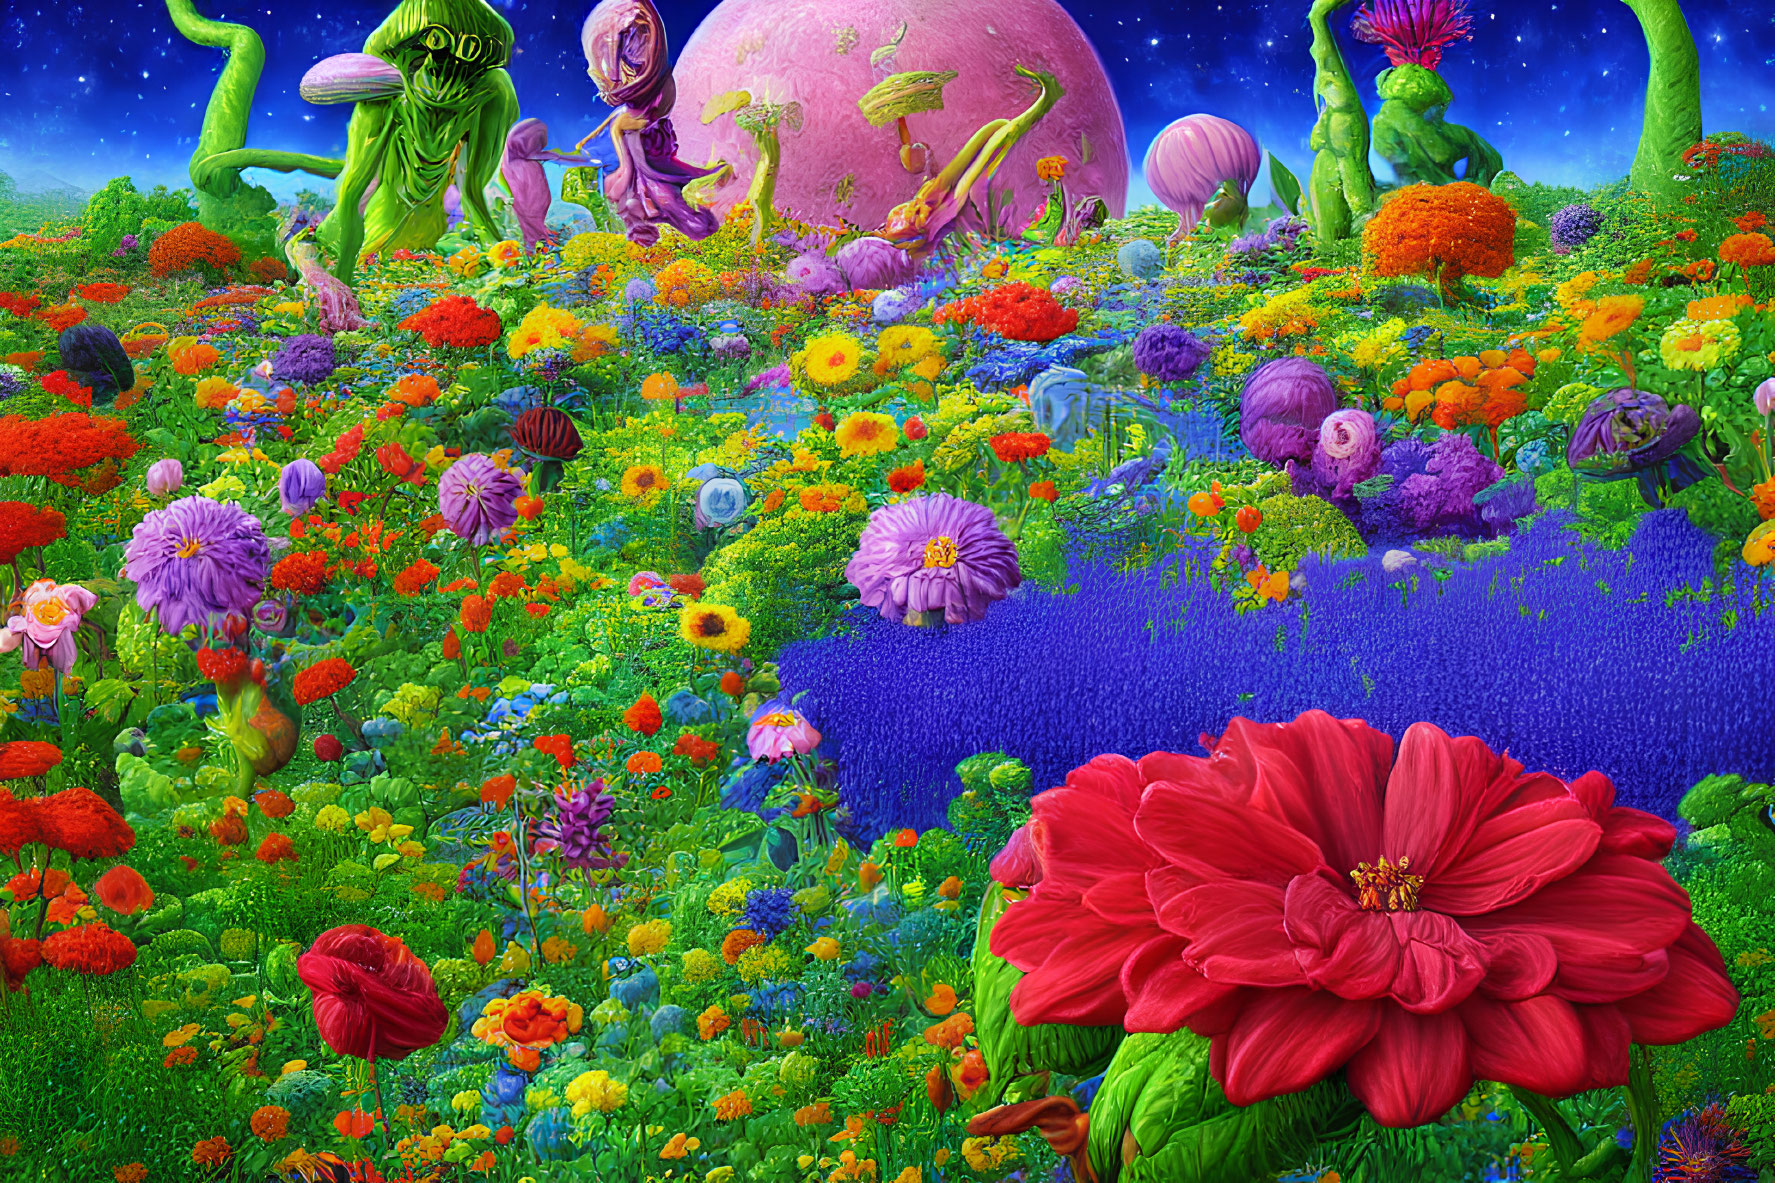 Colorful Flower Field with Alien Plants and Starry Sky Background